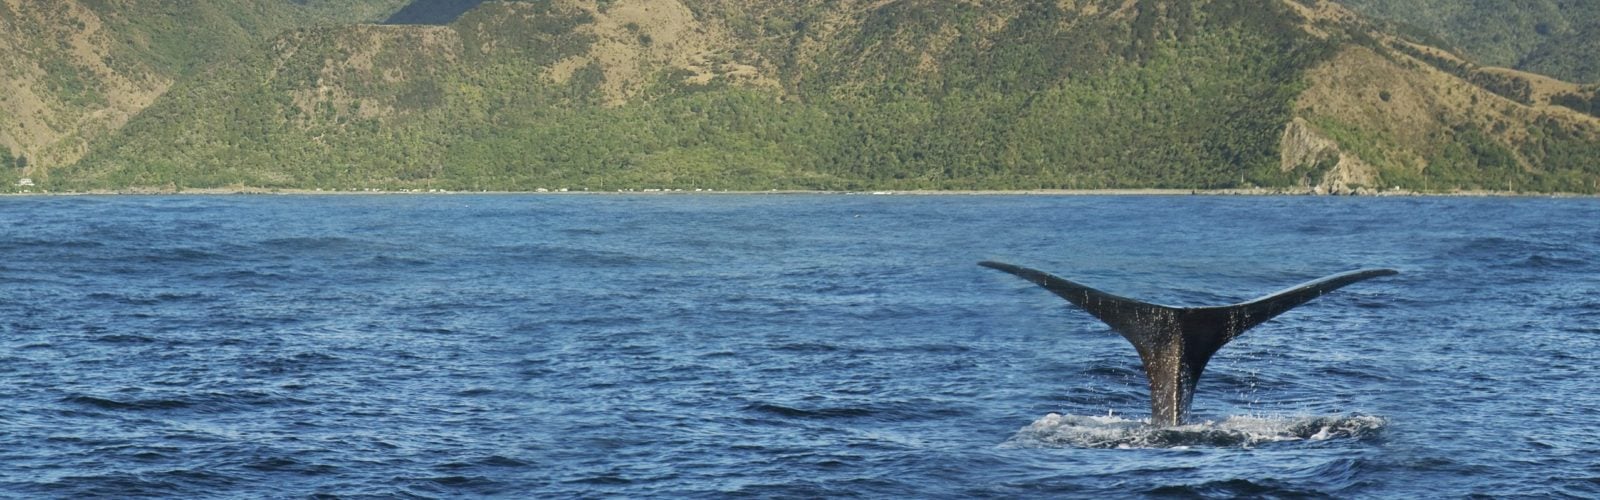 Kaikoura, South Africa - Whale Watching